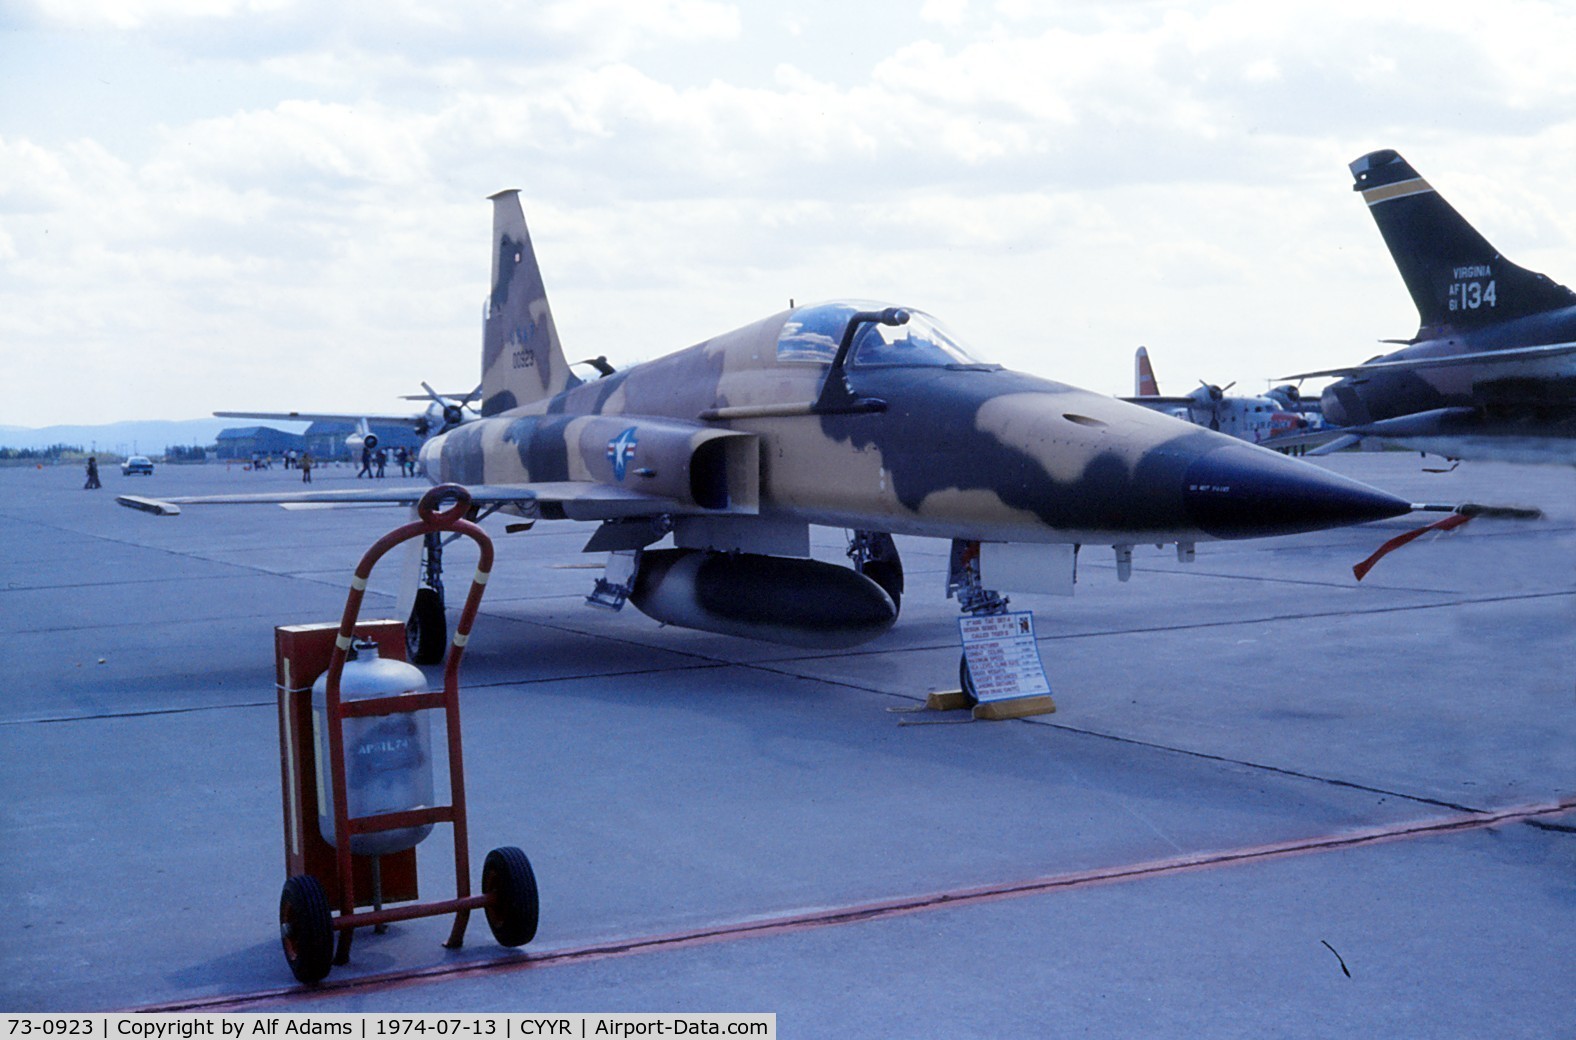 73-0923, 1973 Northrop F-5E Tiger II C/N T.1021, At Canadian Force Station, Goose Bay, Labrador in 1974. Later this aircraft was transferred to the Saudi Arabian Air Force.